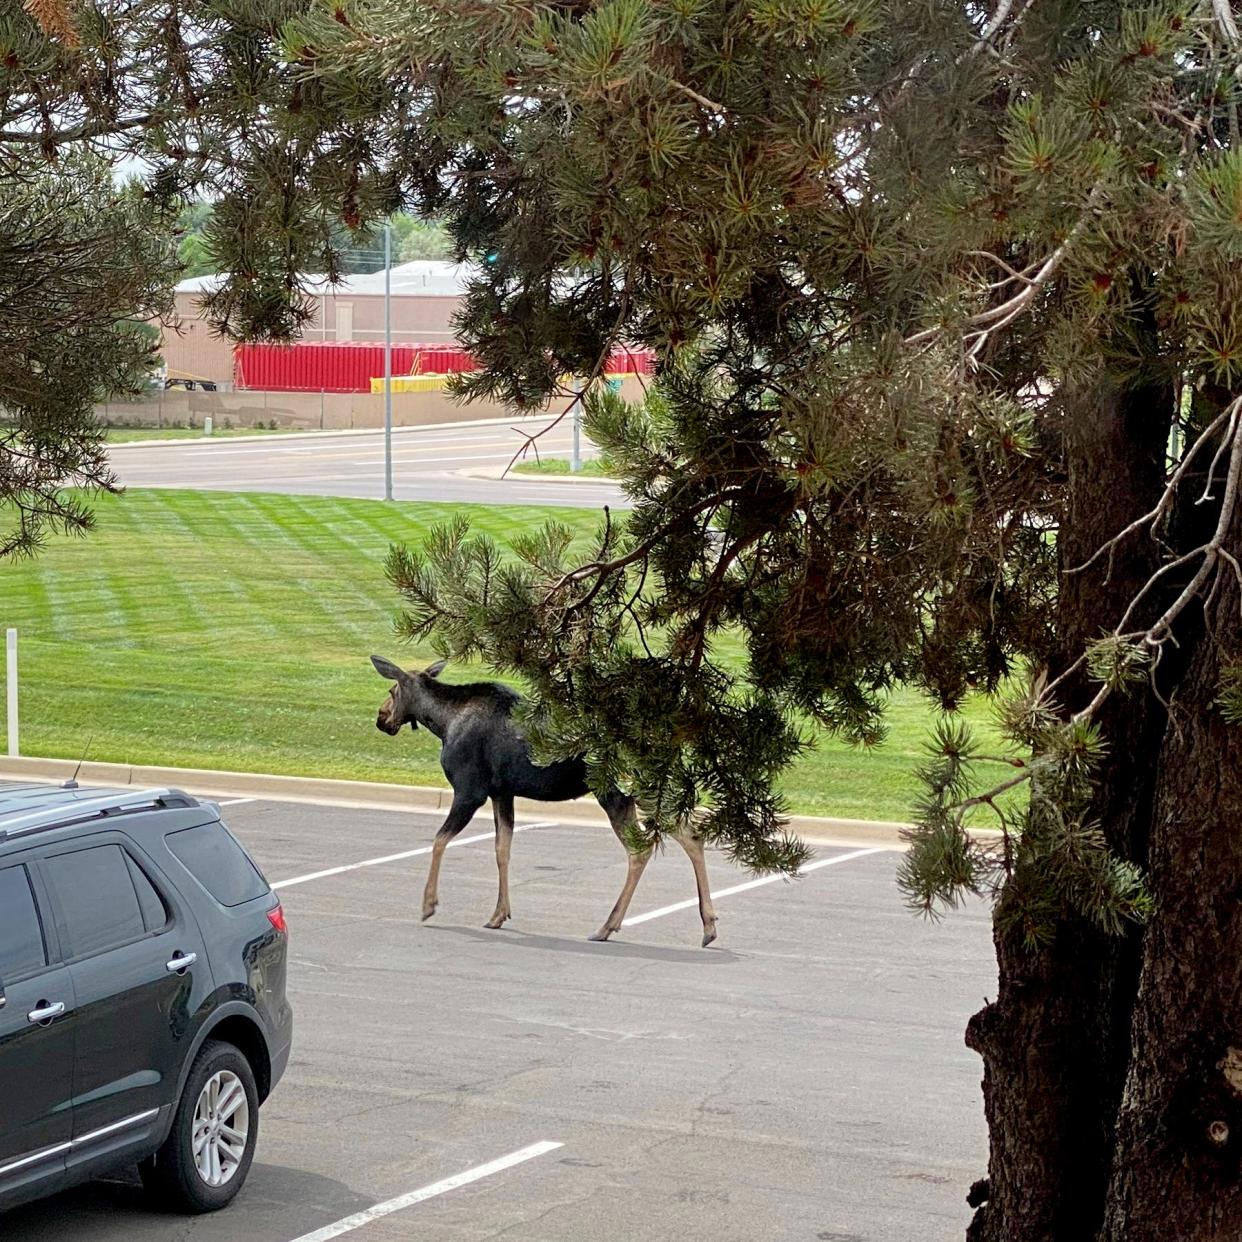 A cow moose is seen walking through the parking lot of the Weld County administration building in east Greeley, Colo., on Wednesday, July 19, 2023.